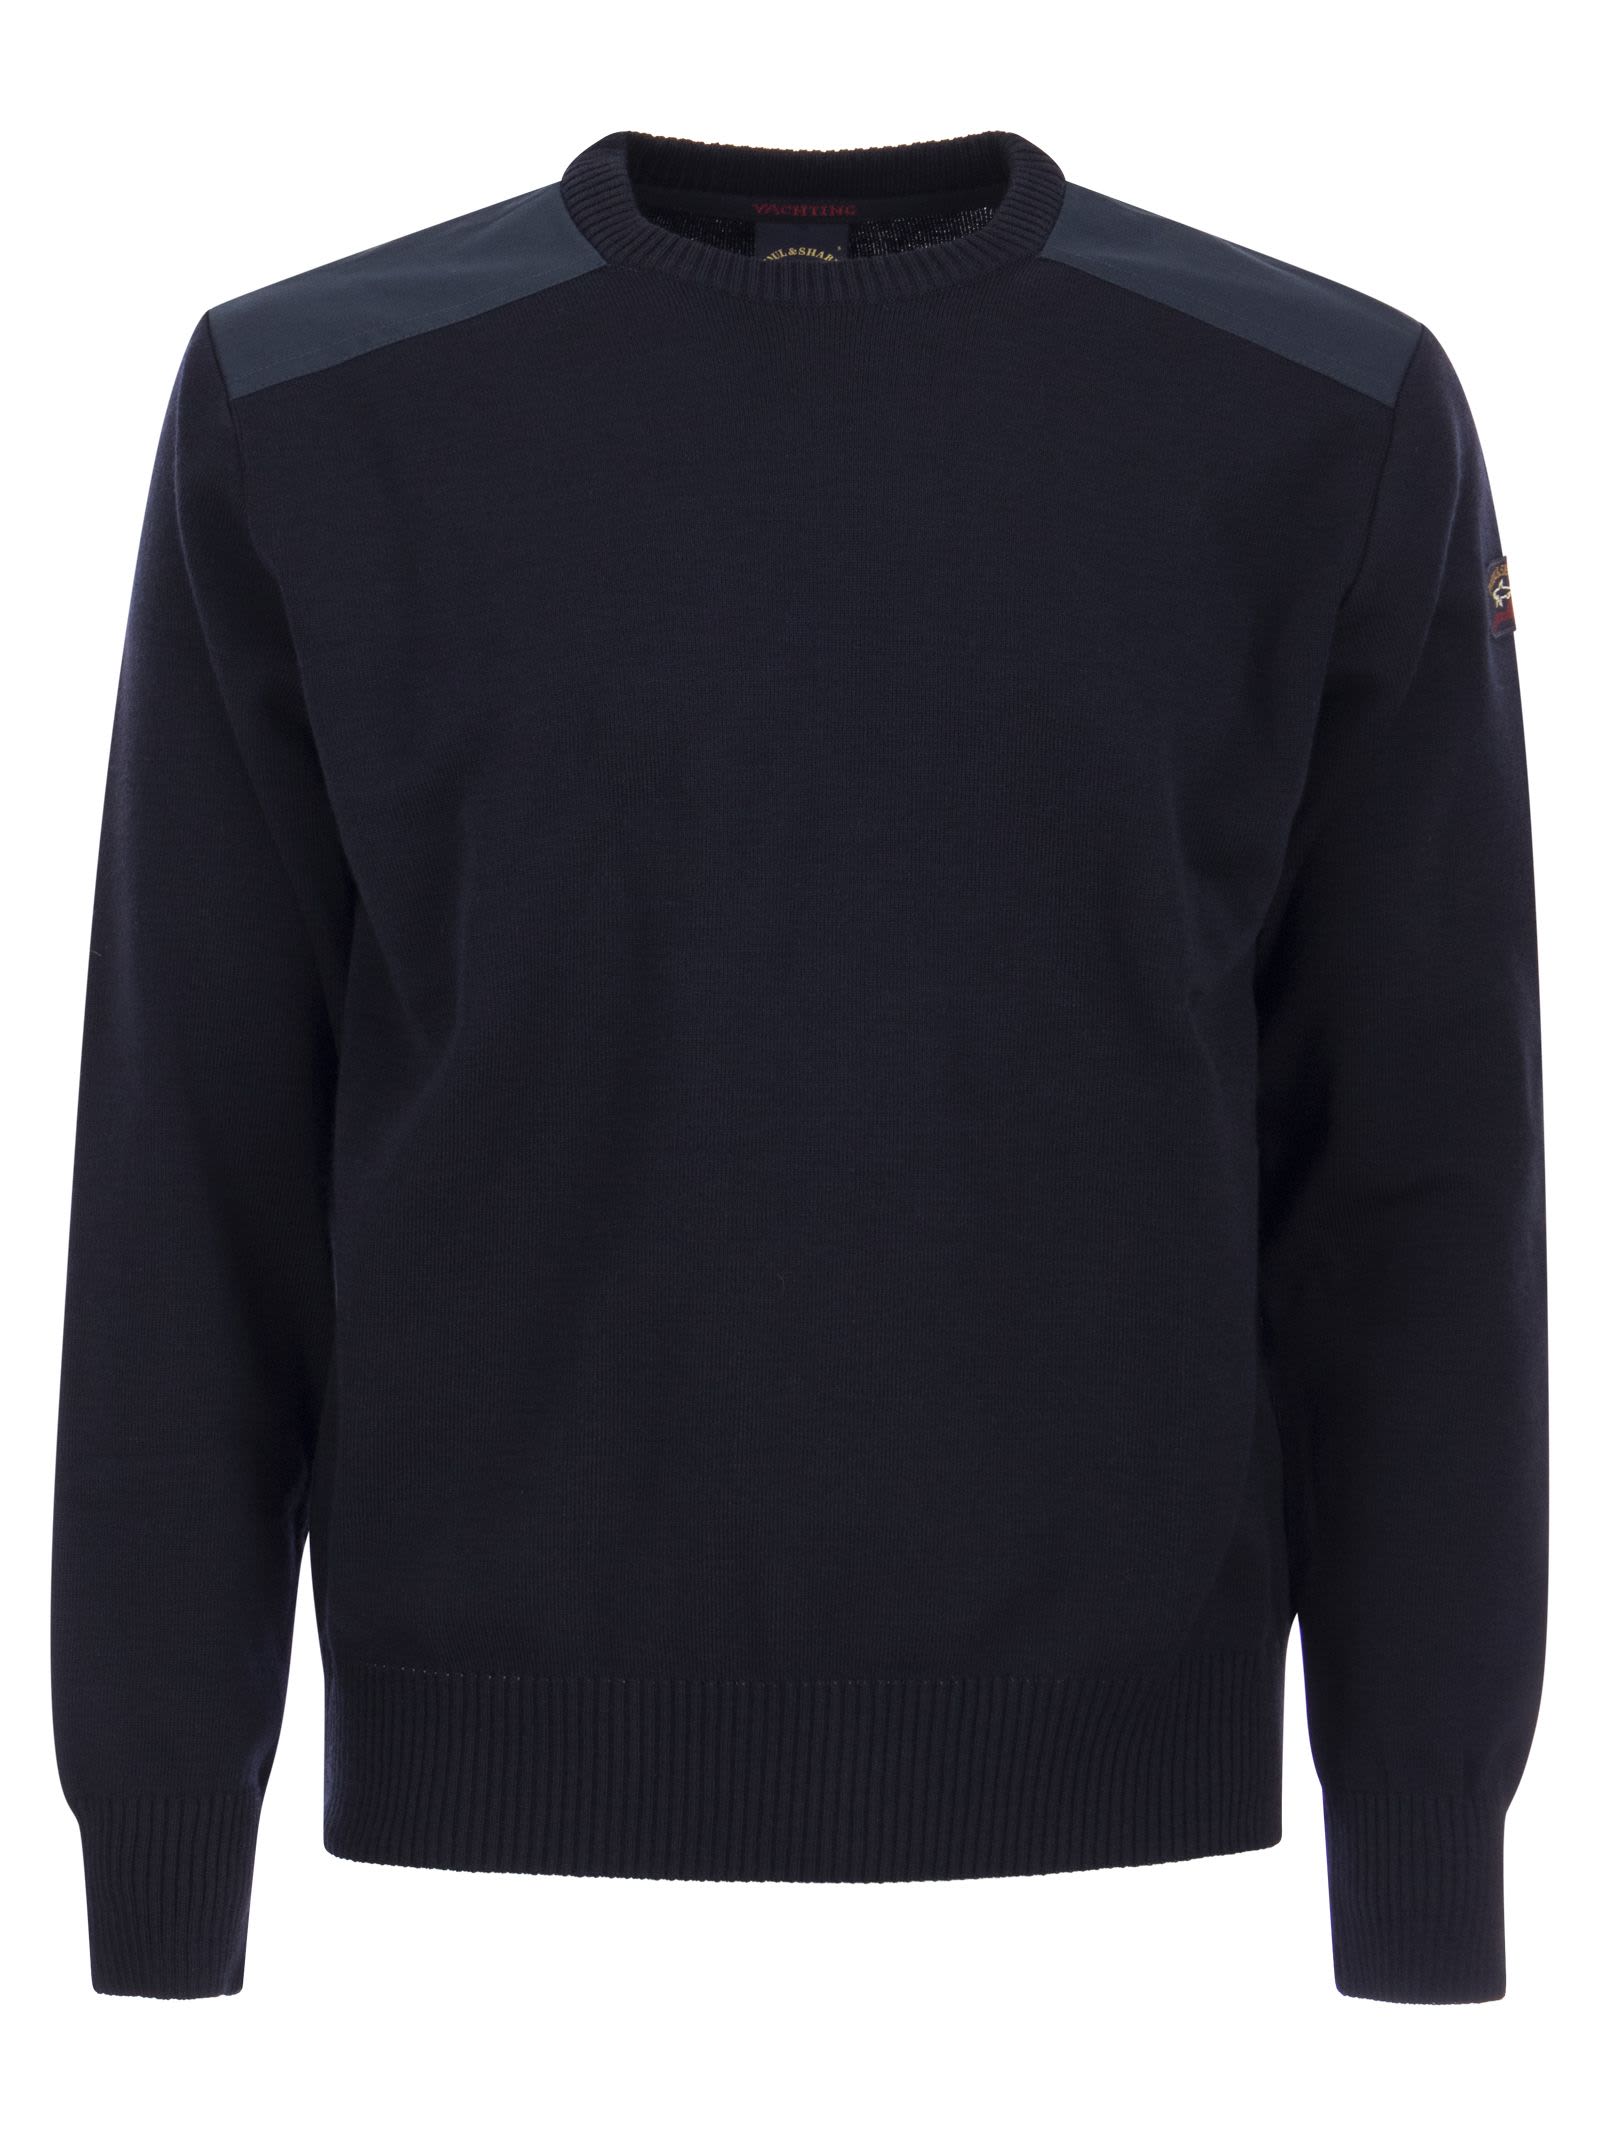 Paul&amp;shark Wool Crew Neck With Iconic Badge In Navy